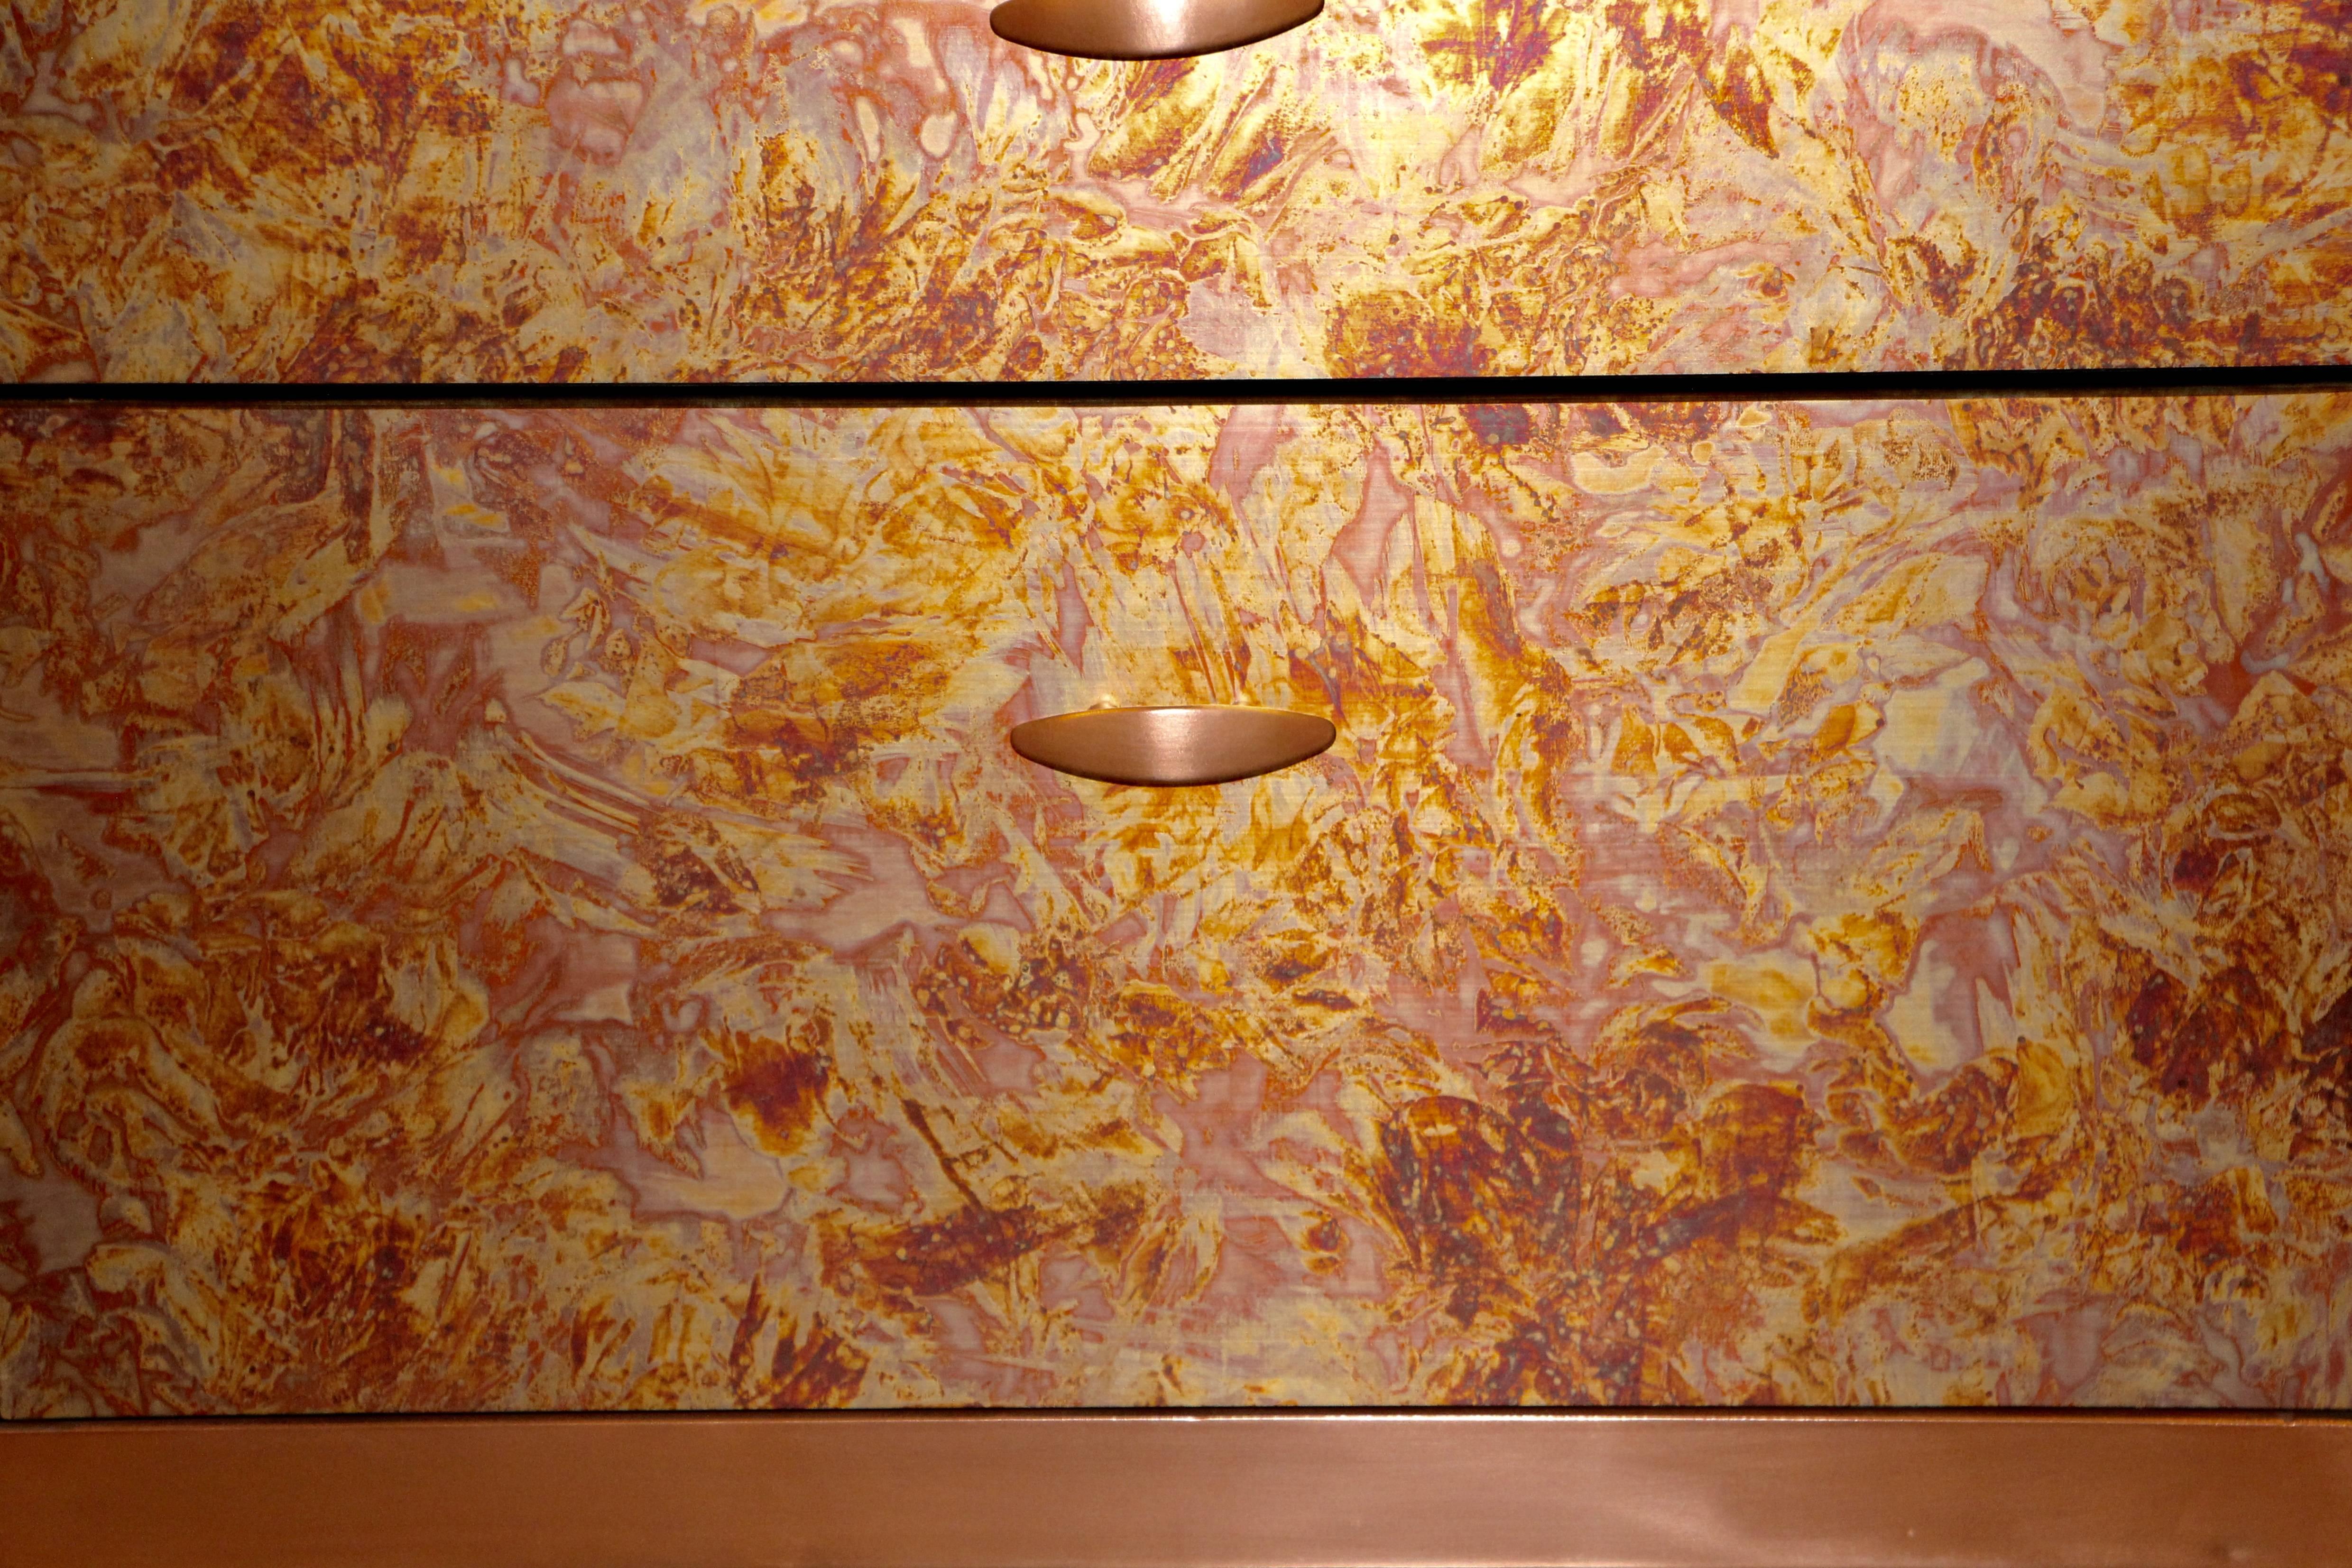 American Patinated Copper Sheet Clad Nightstands or Chests